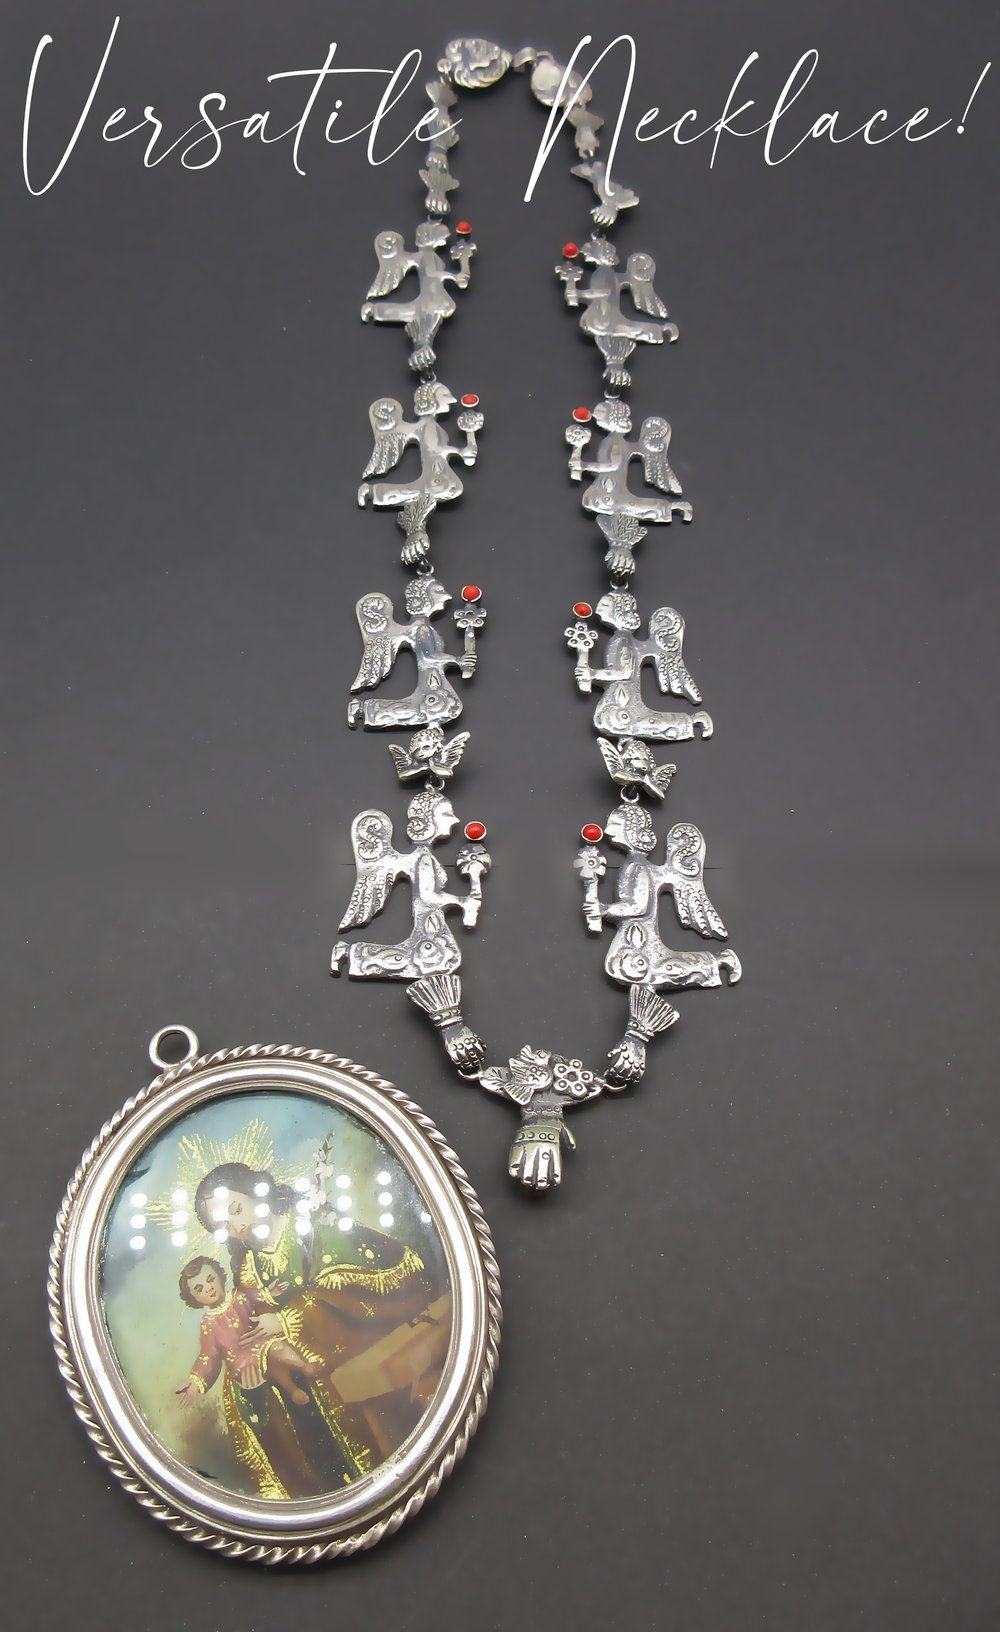 Mexican Vintage Charm Bracelet Sterling Silver With Peruvian Inca